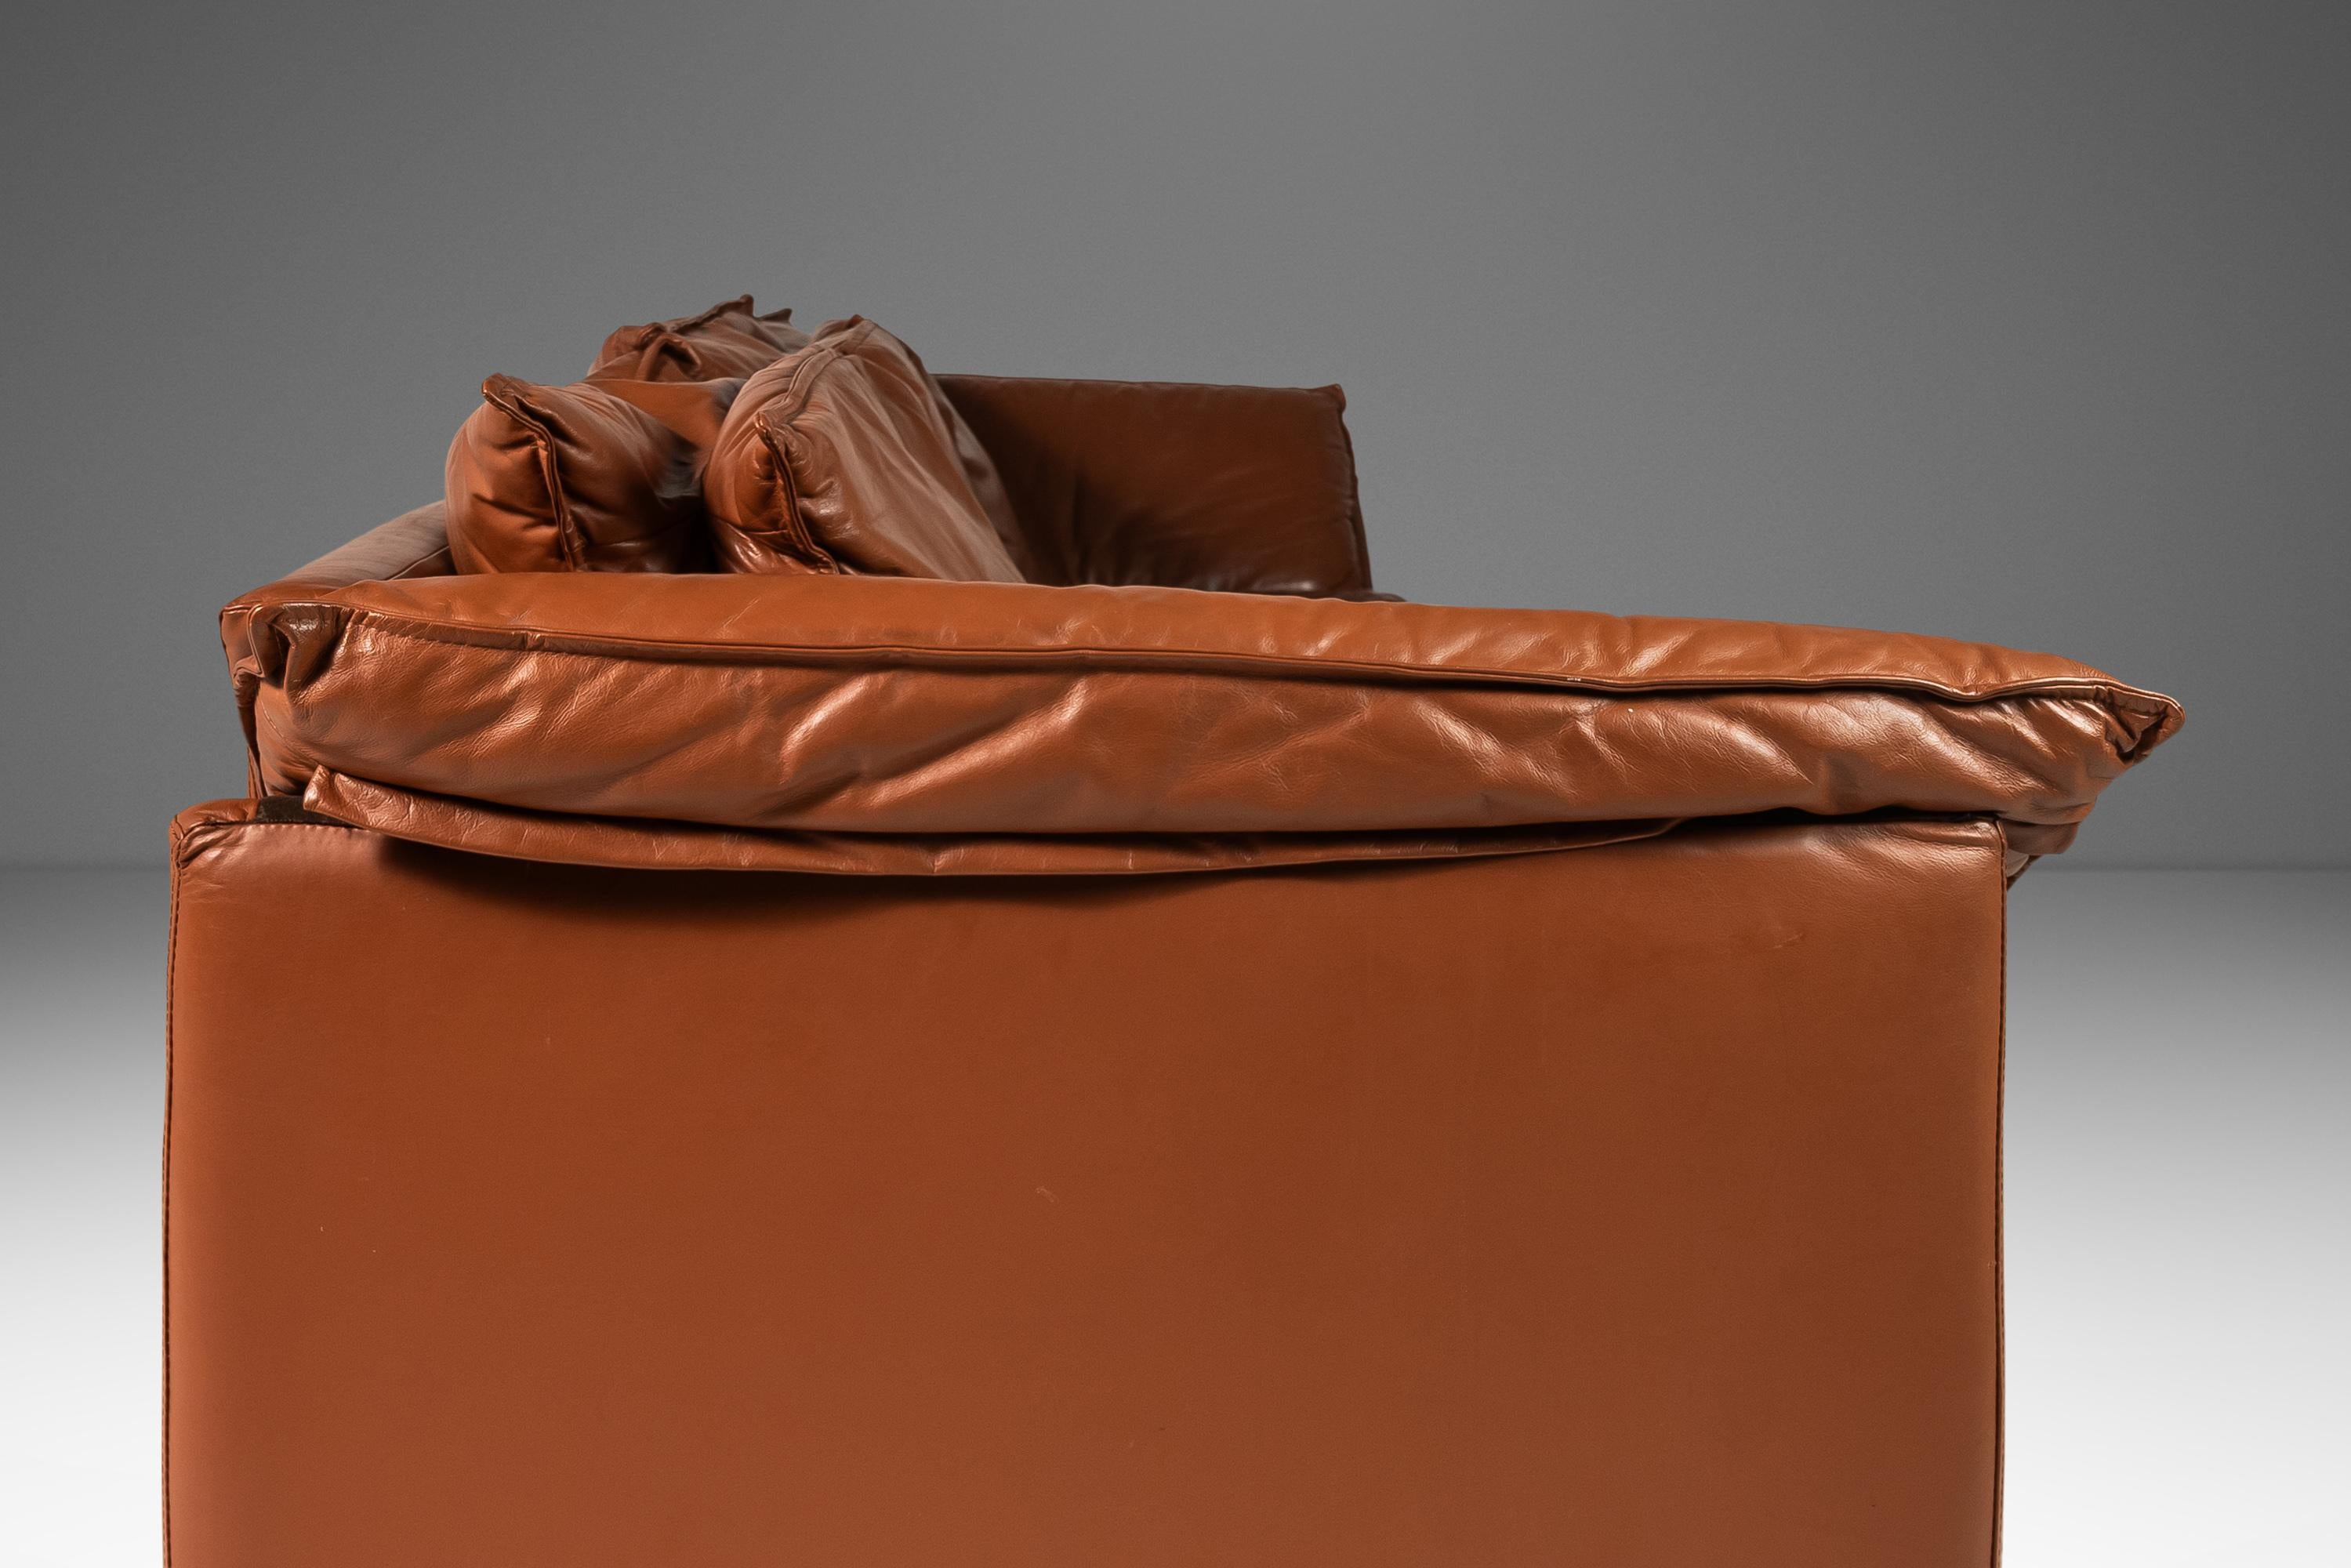 Low Profile Sofa in Cognac Brown Leather in the Manner of Niels Eilersen, 1980's For Sale 12